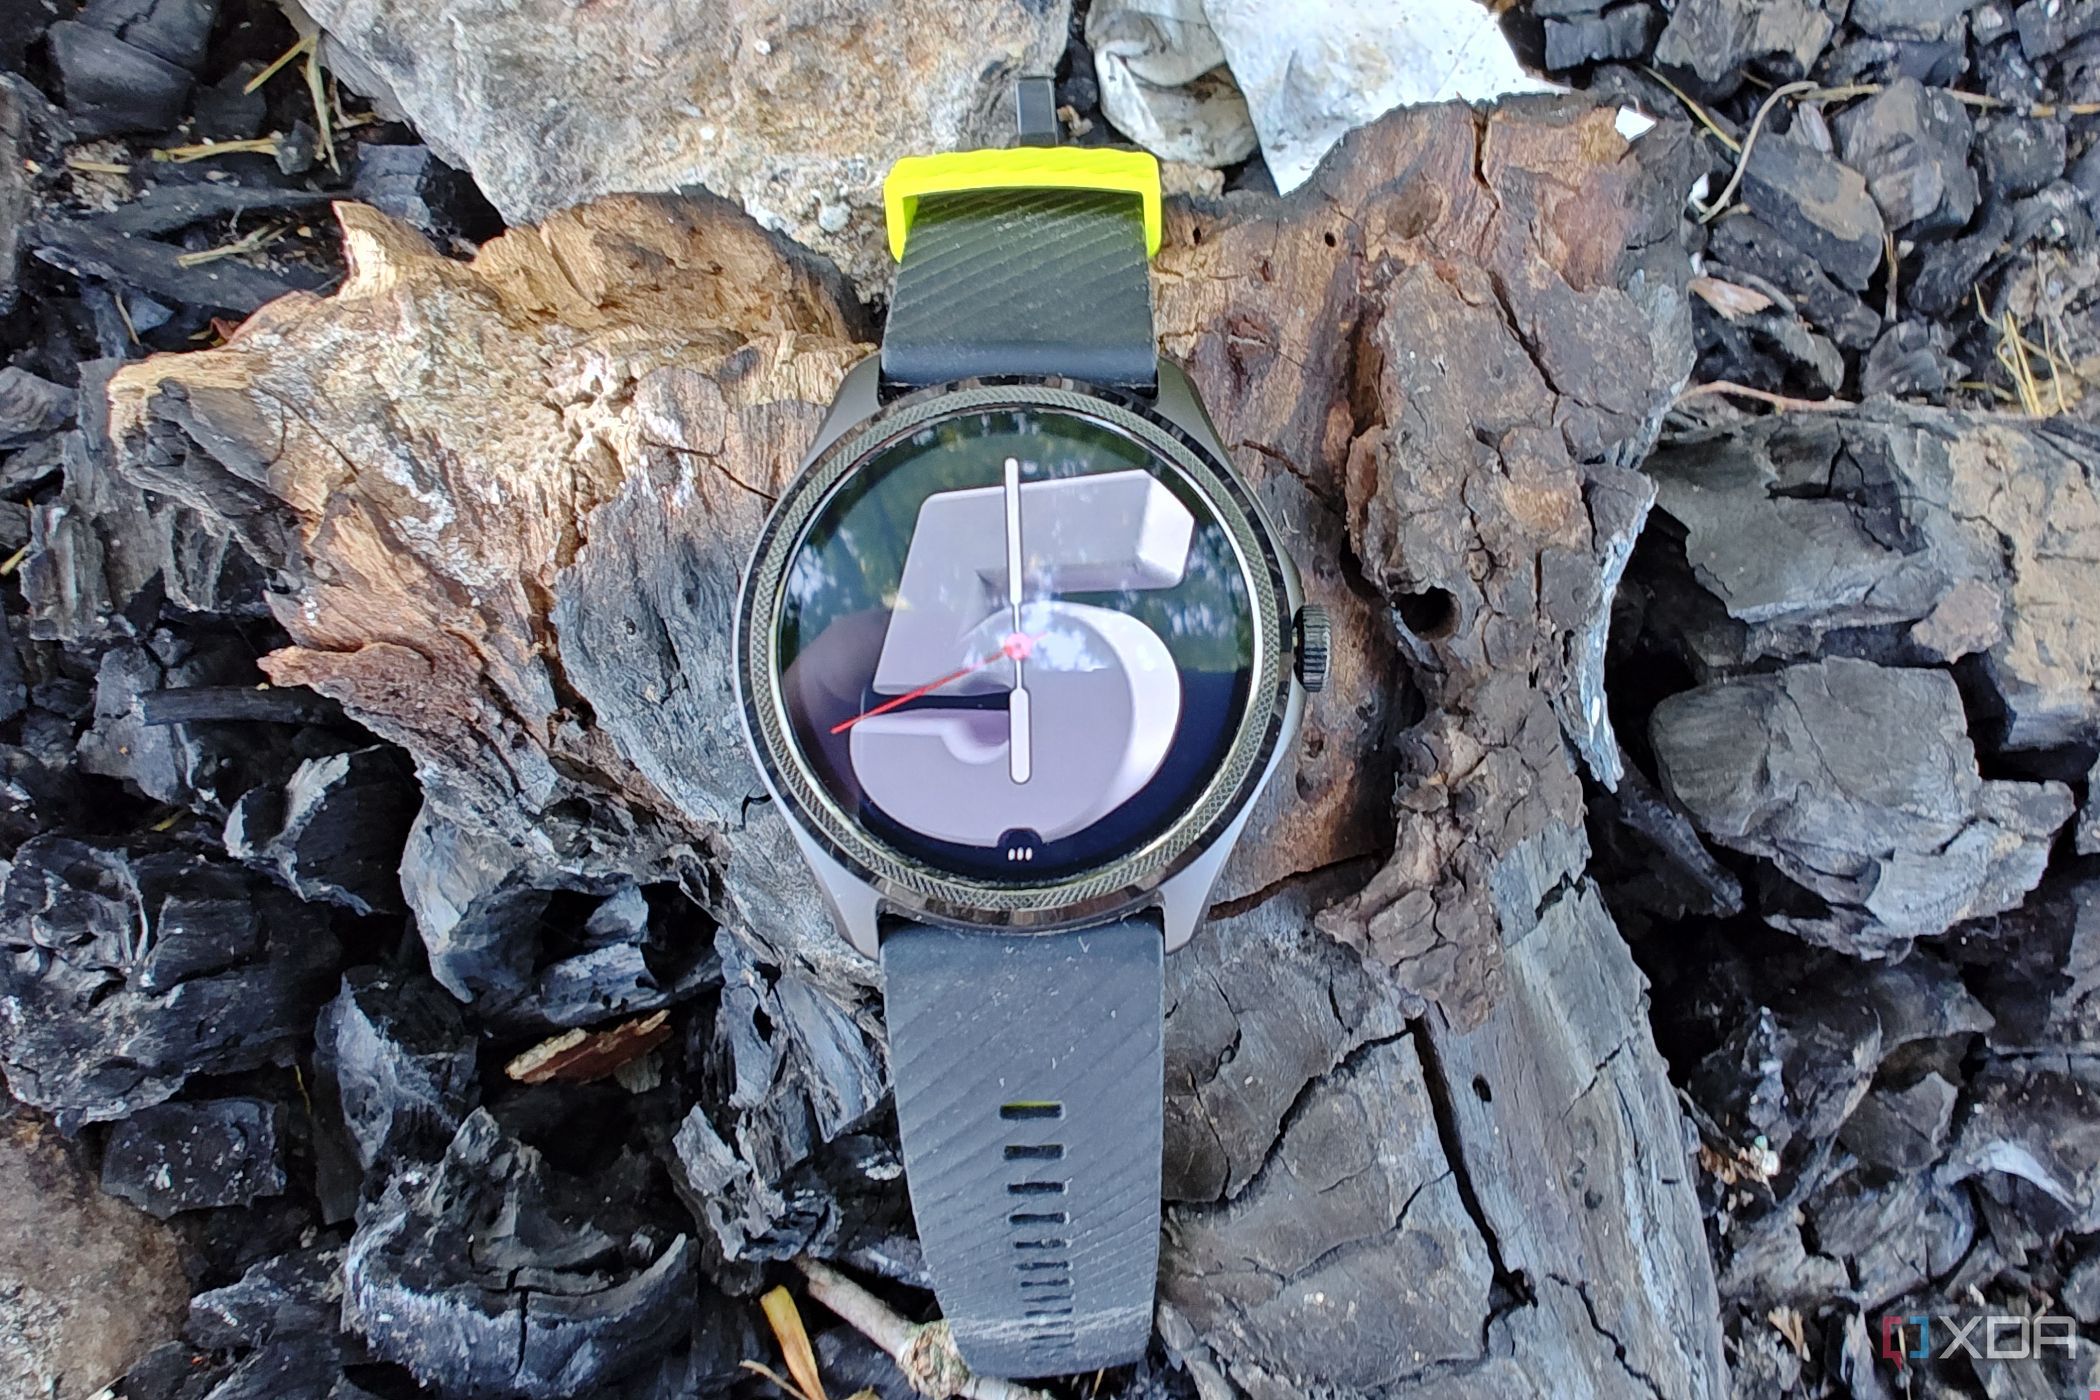 Samsung Galaxy Watch 5 Pro vs. Amazfit T-Rex 2: Two kings of different  worlds